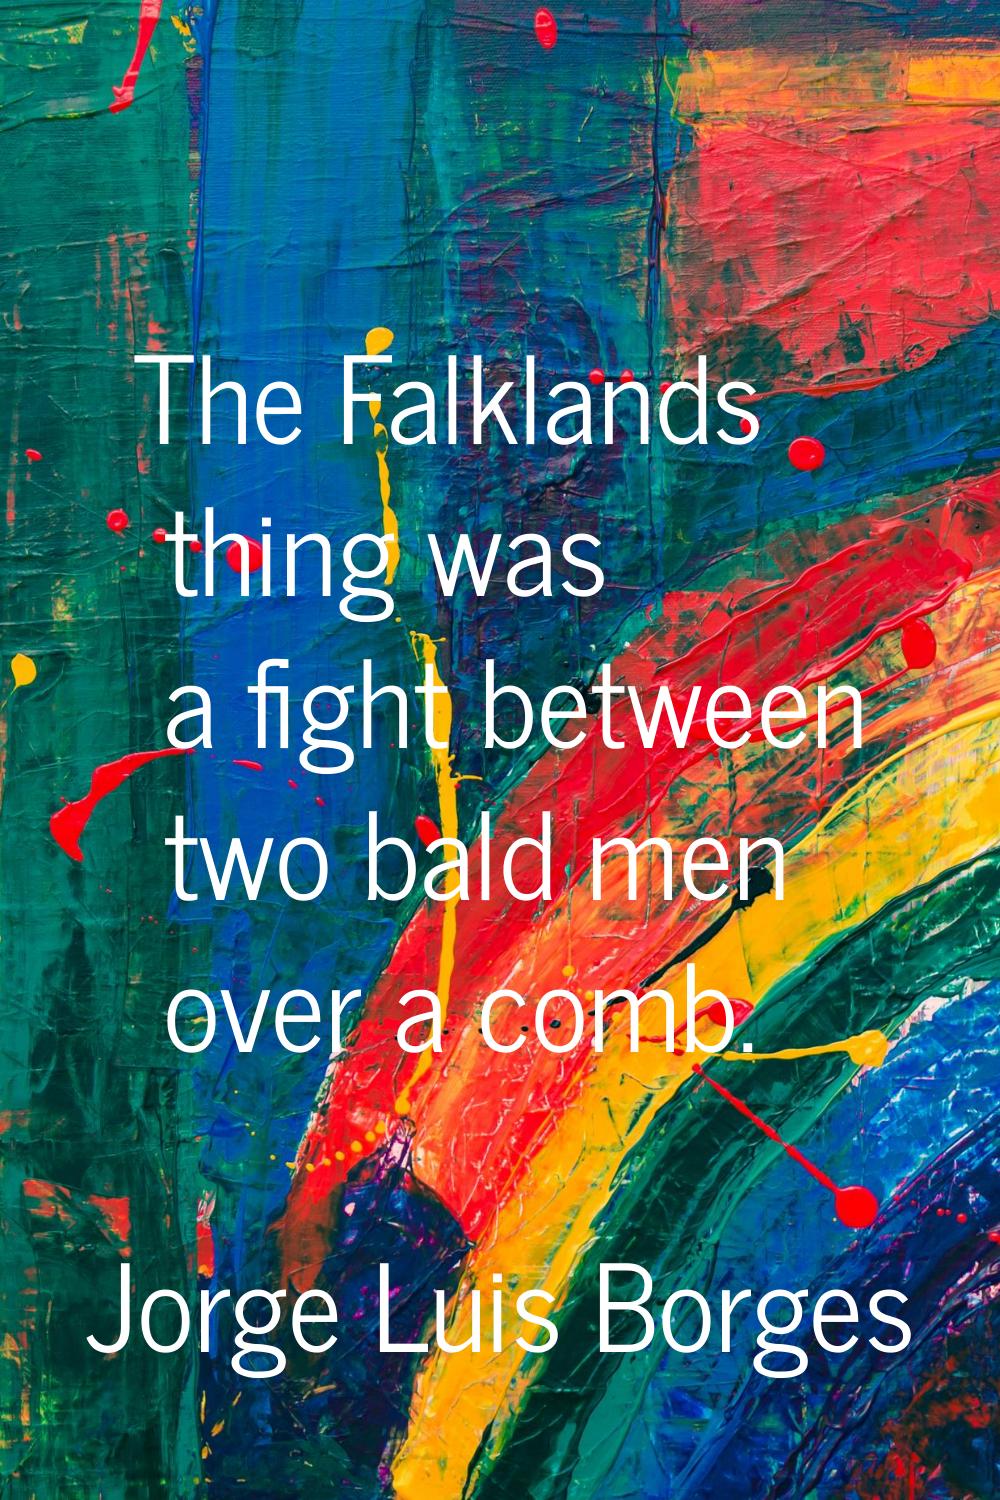 The Falklands thing was a fight between two bald men over a comb.